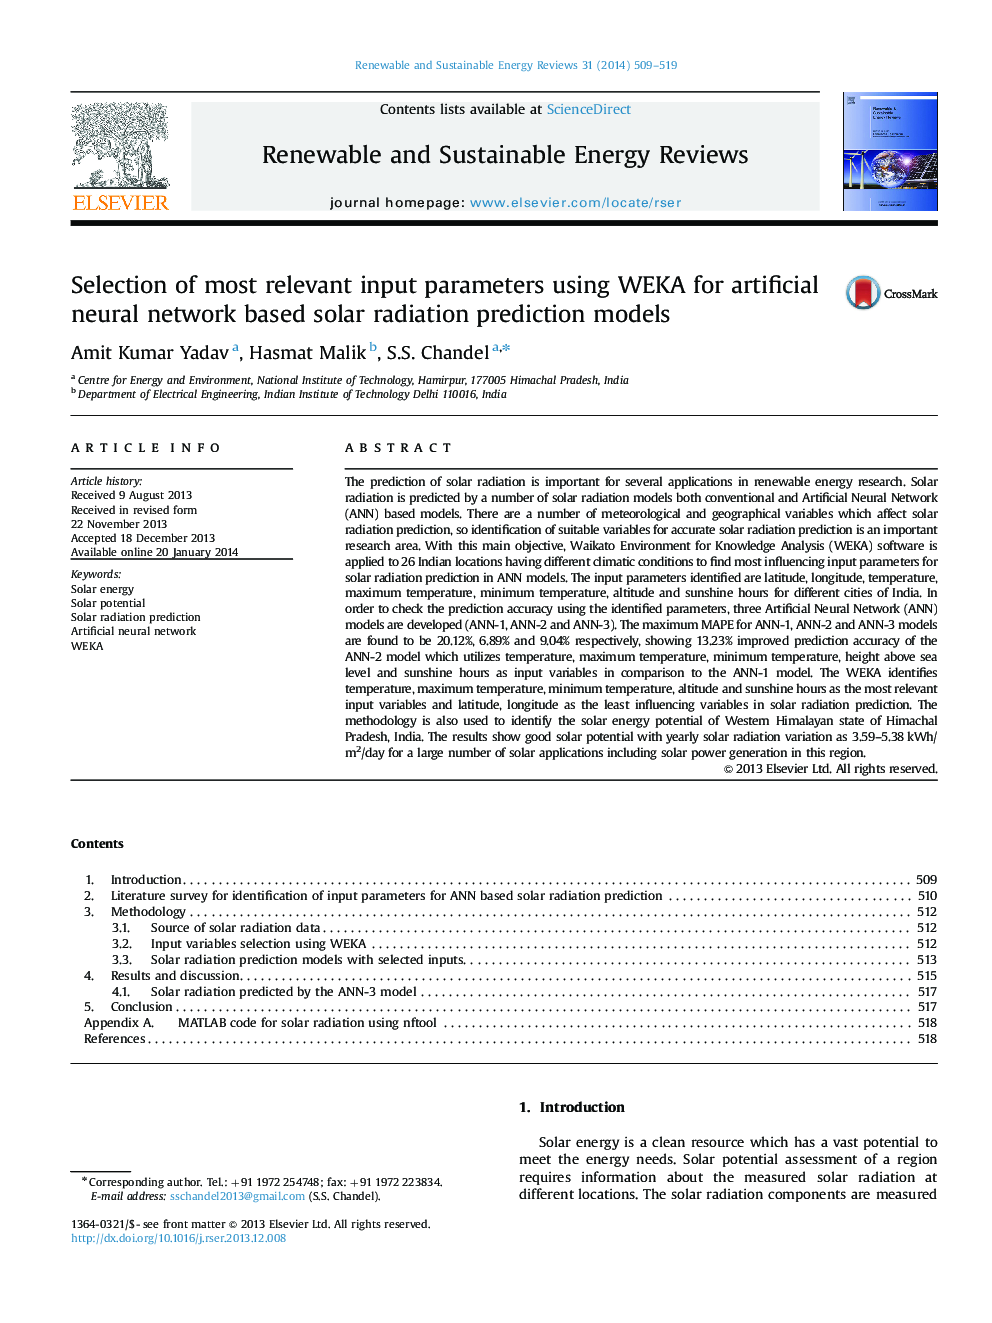 Selection of most relevant input parameters using WEKA for artificial neural network based solar radiation prediction models